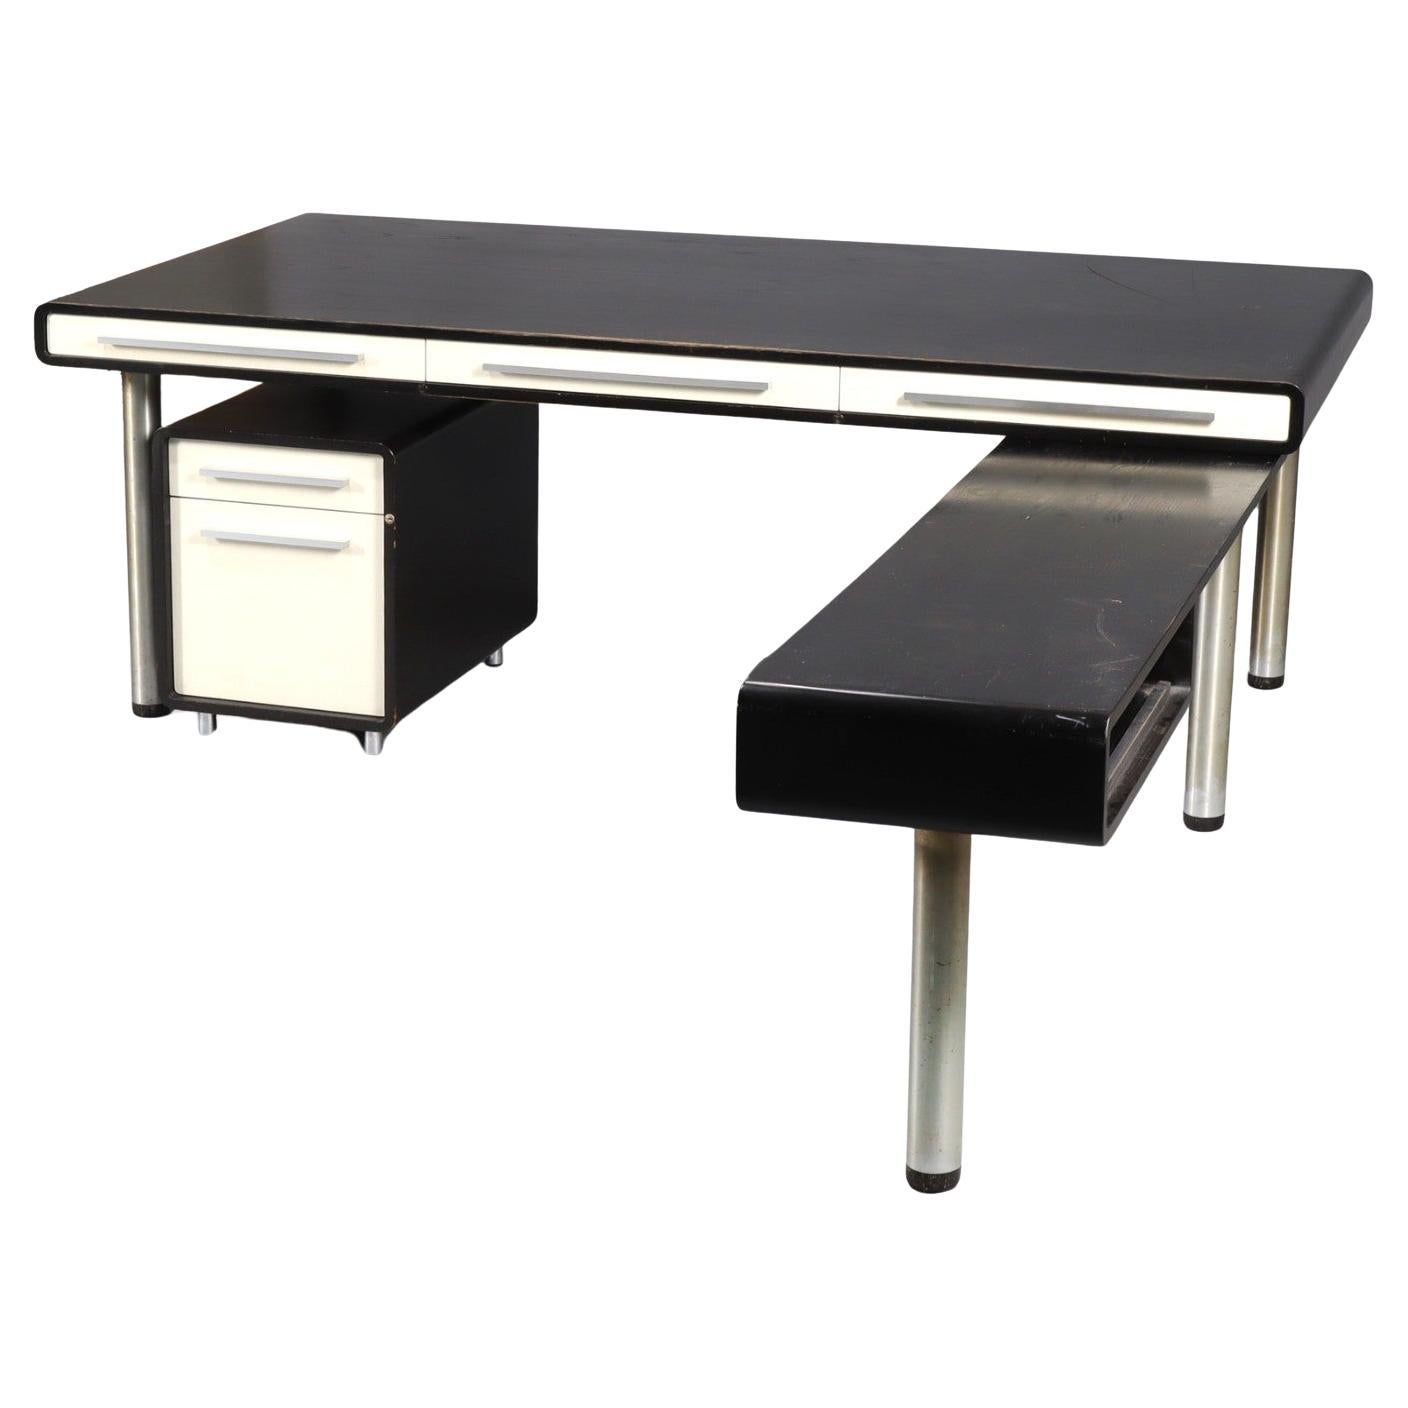 Dyrlund Desk Model 'Space' With Side Table And Drawer Module For Sale